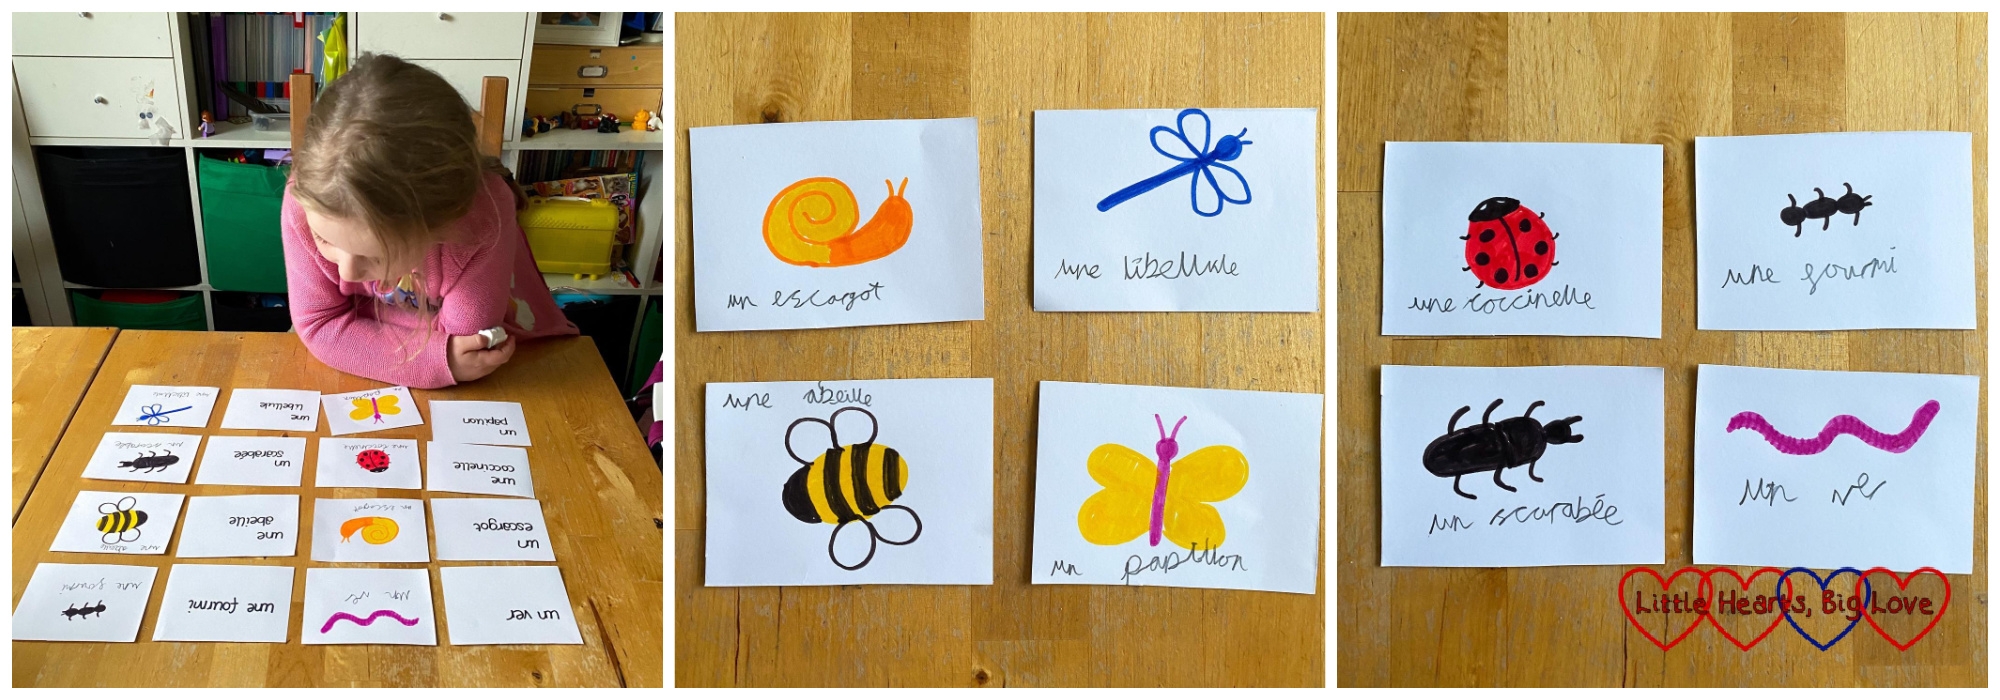 Sophie with her French insect flash cards; flashcards showing a snail (un escargot), a dragonfly (une libellule), a bee (une abeille) and a butterfly (un papillon); flashcards showing a ladybird (une coccinelle), an ant (une fourmi), a beetle (un scarabee) and a worm (un ver)